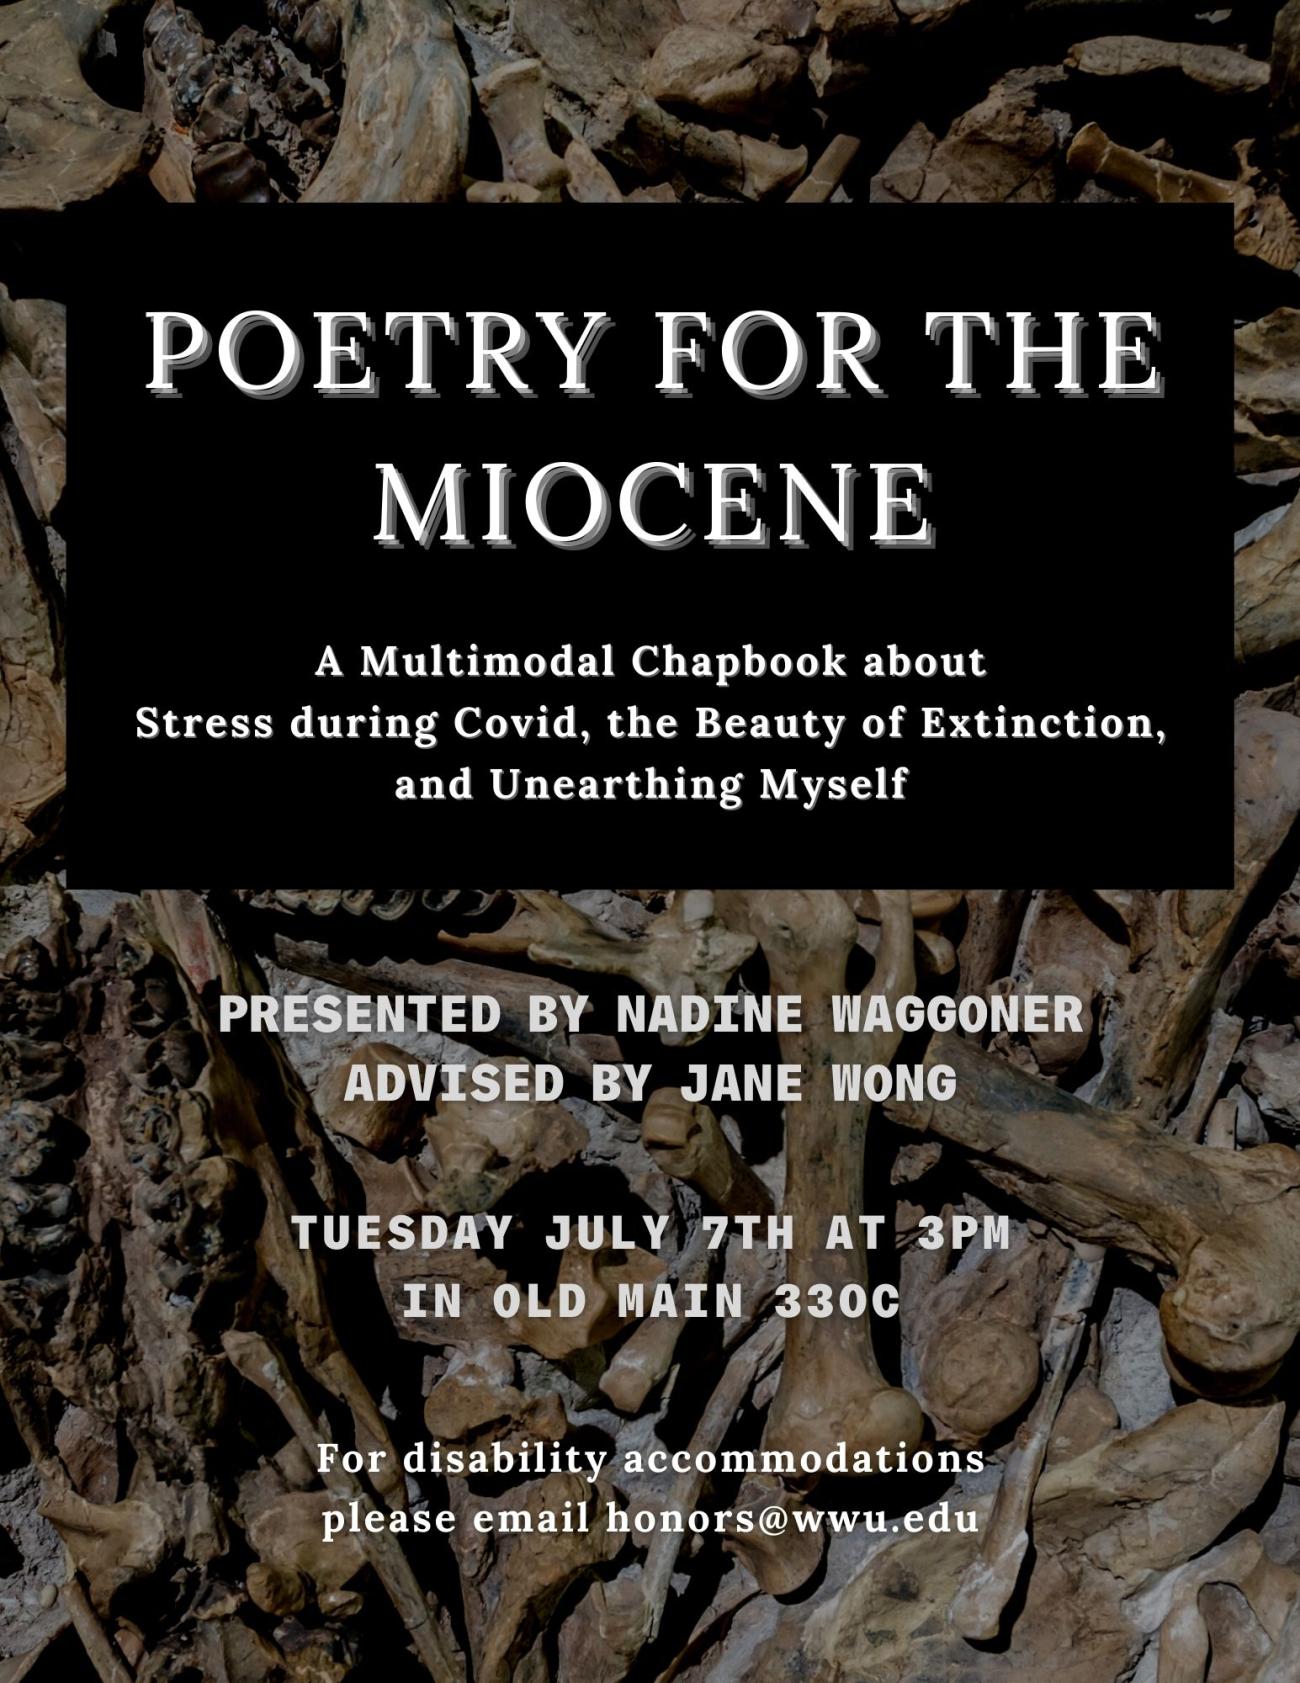 Poster withwhite text on a dark brown background. The brown background consists of a solid-brown color box in front of an image of scattered animal bones on a flat surface. The text reads: "Poetry for the Miocene: A Multimodal Chapbook about Stress during Covid, the Beauty of Extinction, and Unearthing Myself. Presented by Nadine Waggoner, advised by Jane Wong. Tuesday, June 7th at 3pm in Old Main 330C. For disability accommodations, please email honors@wwu.edu."